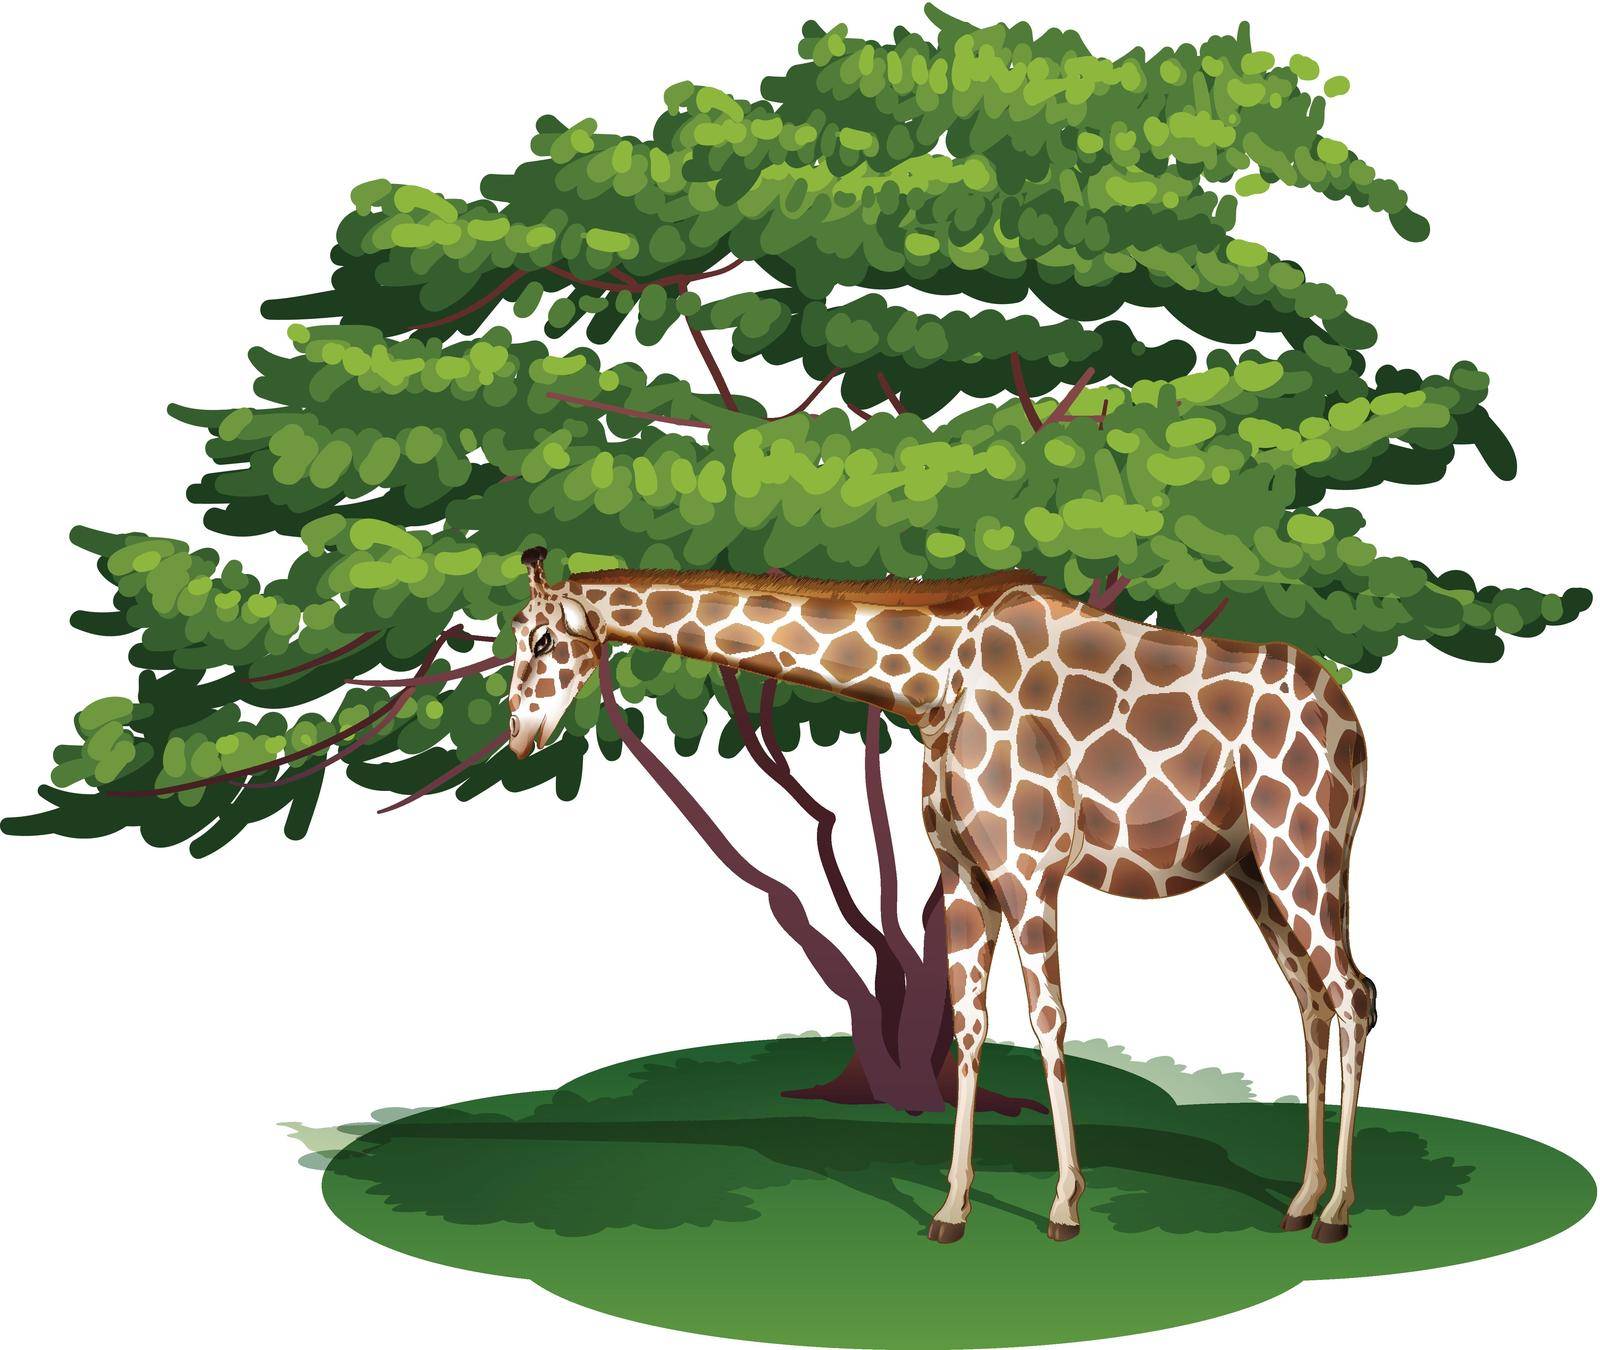 Illustration of a giraffe under the tree on a white background